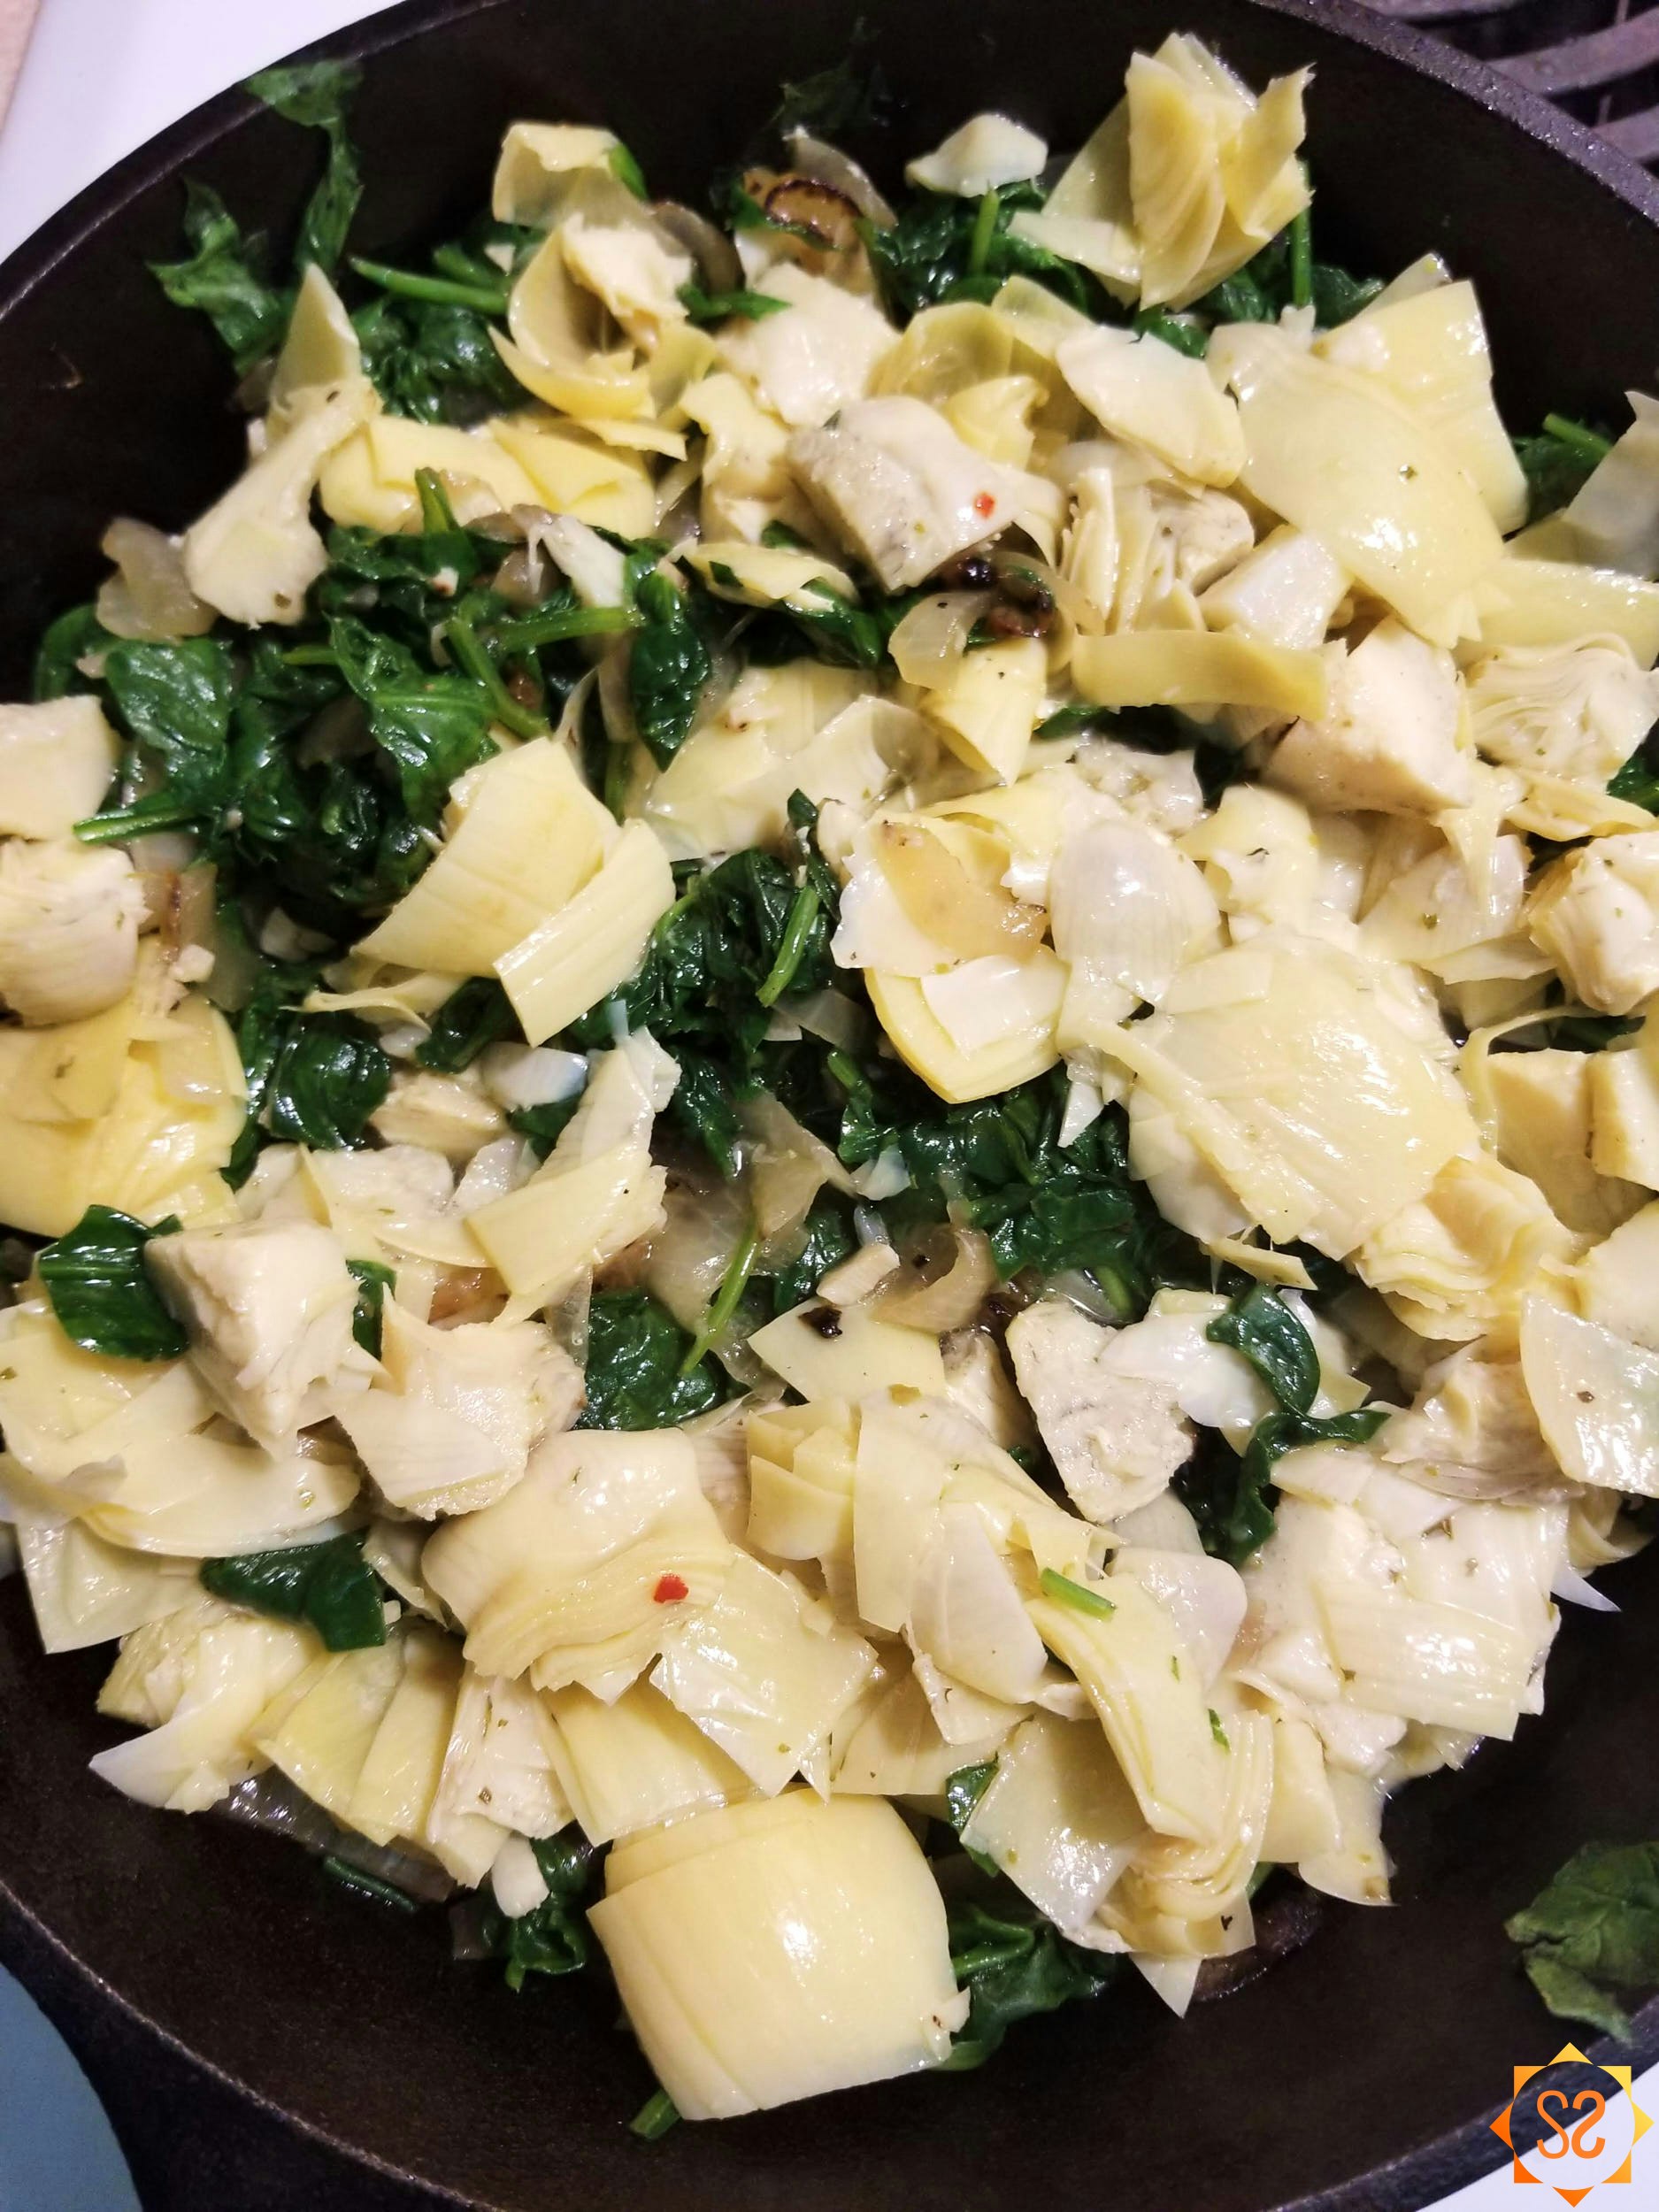 Onions, garlic, spinach, and artichokes in a pan